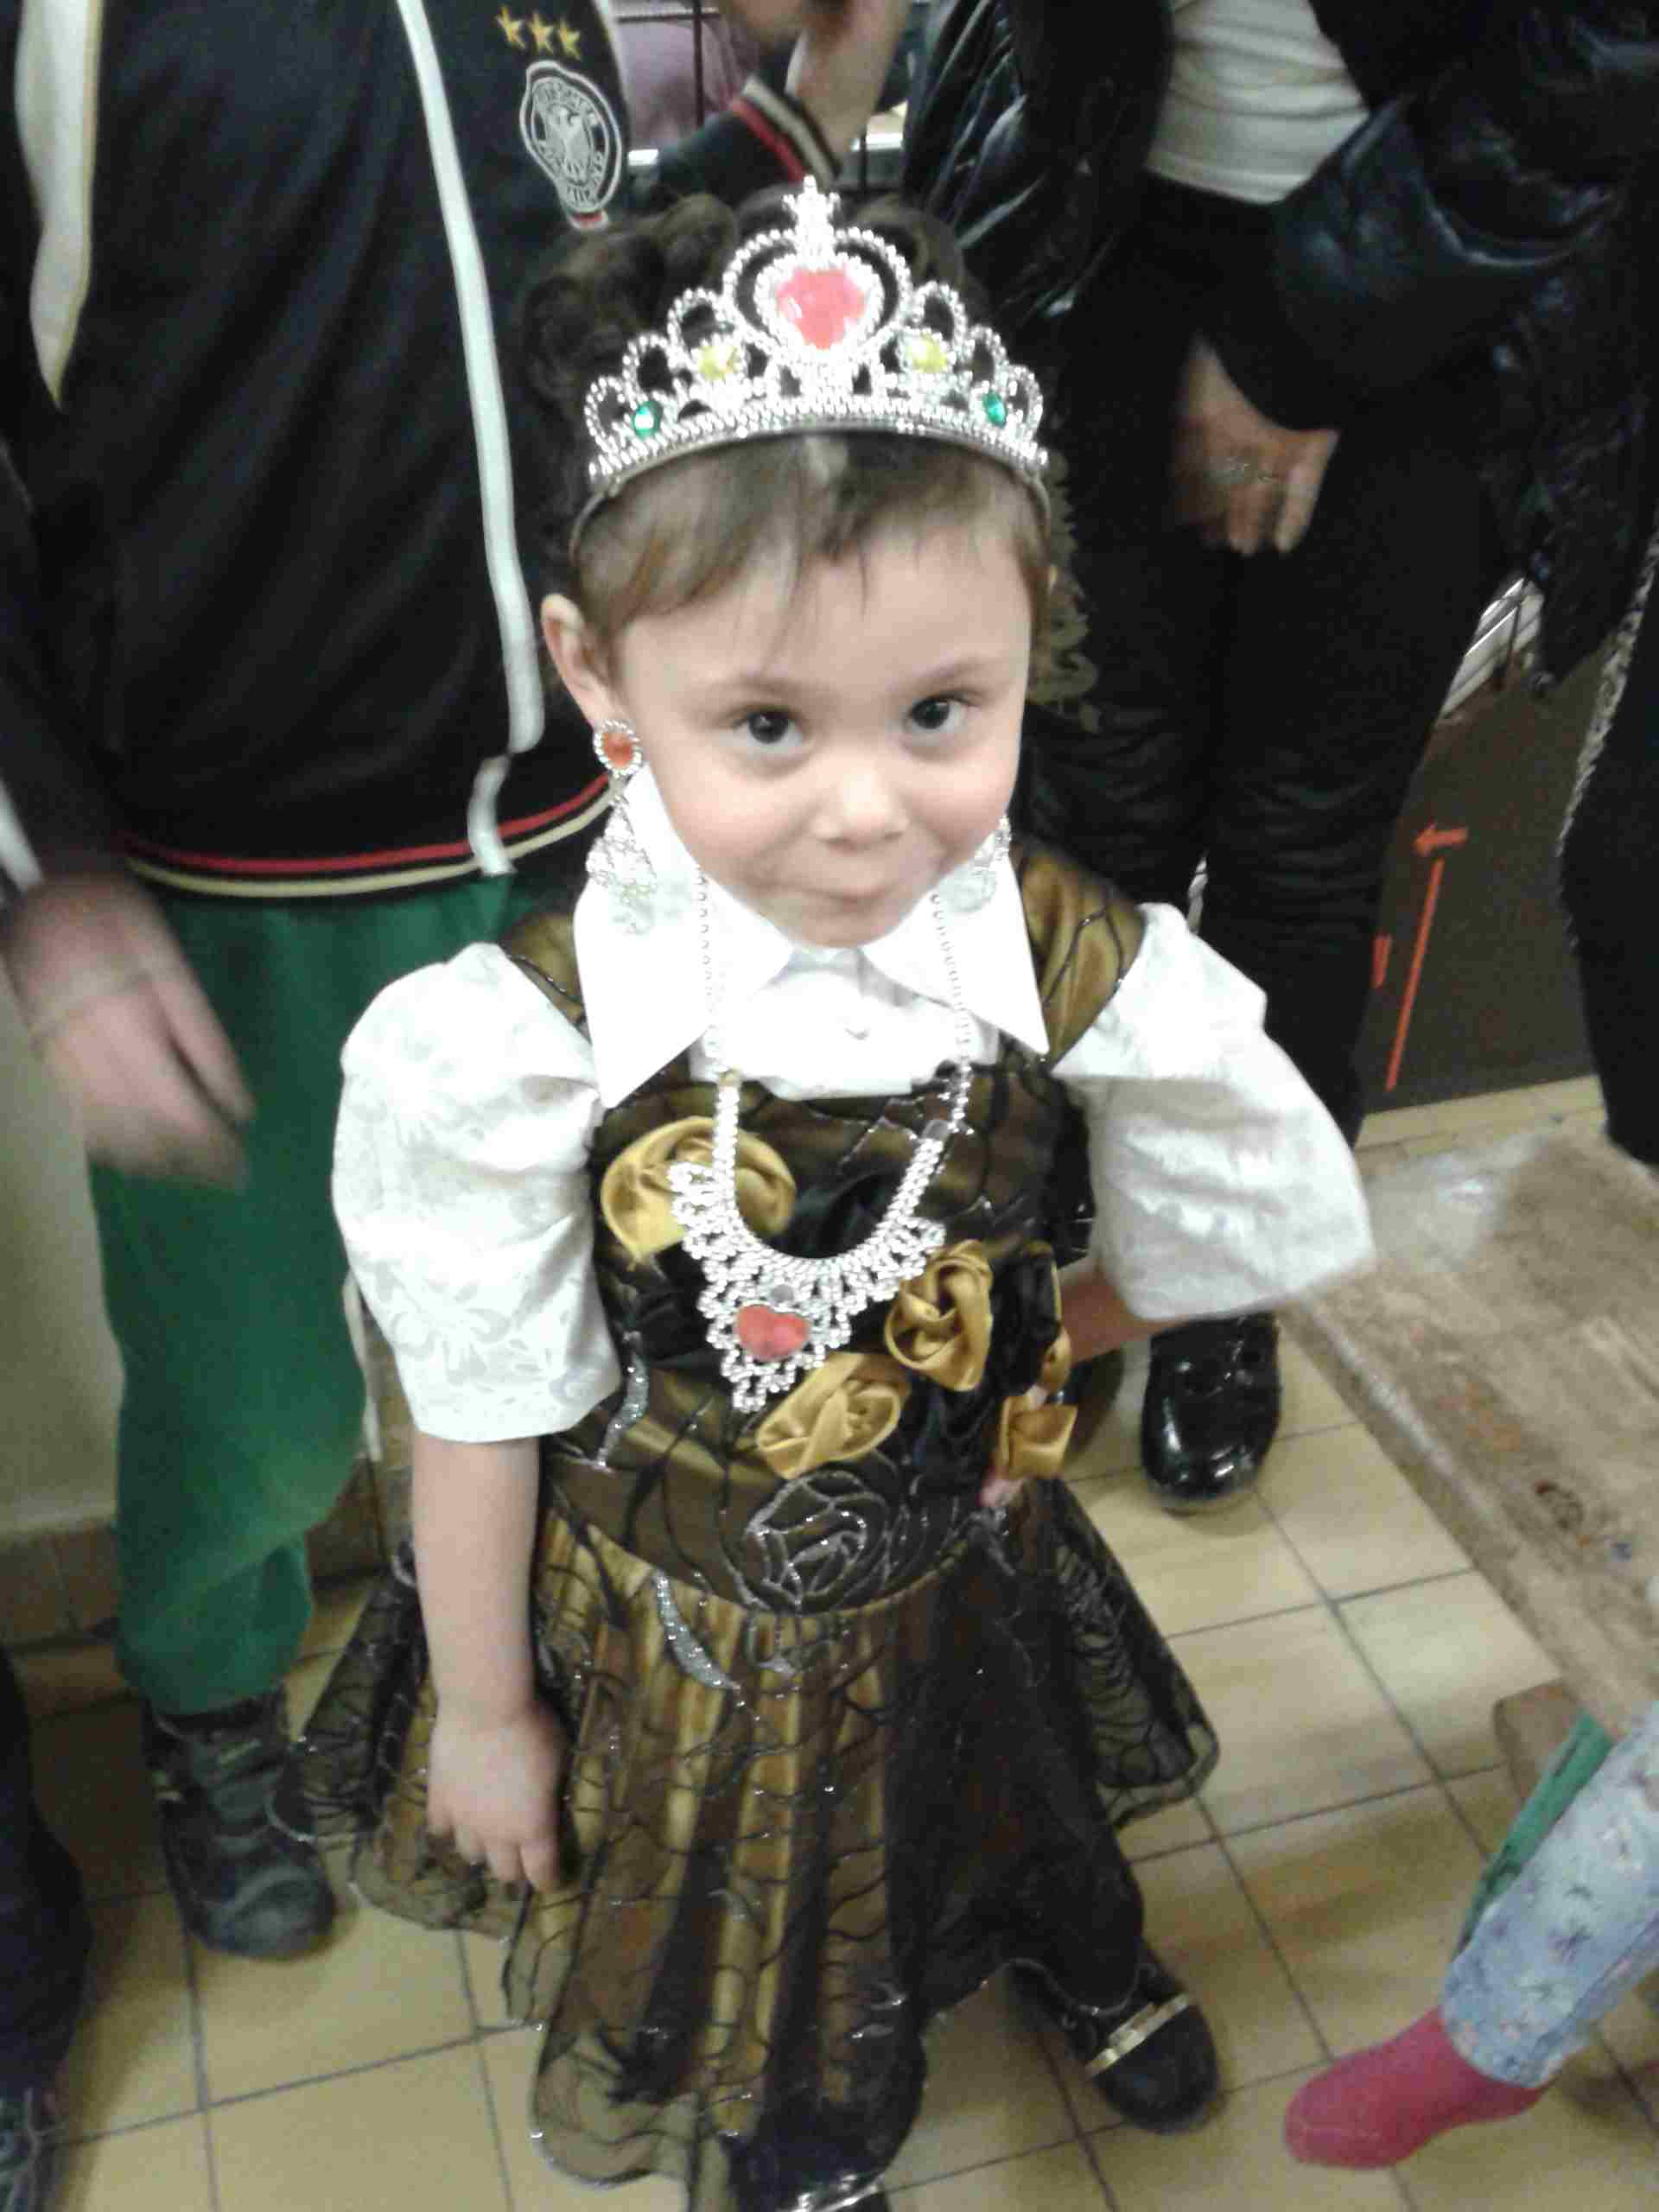 This little girl of 3 years old, is Praising The
              Lord, and so happy to receive her Coronet of Glory from
              friends in UK